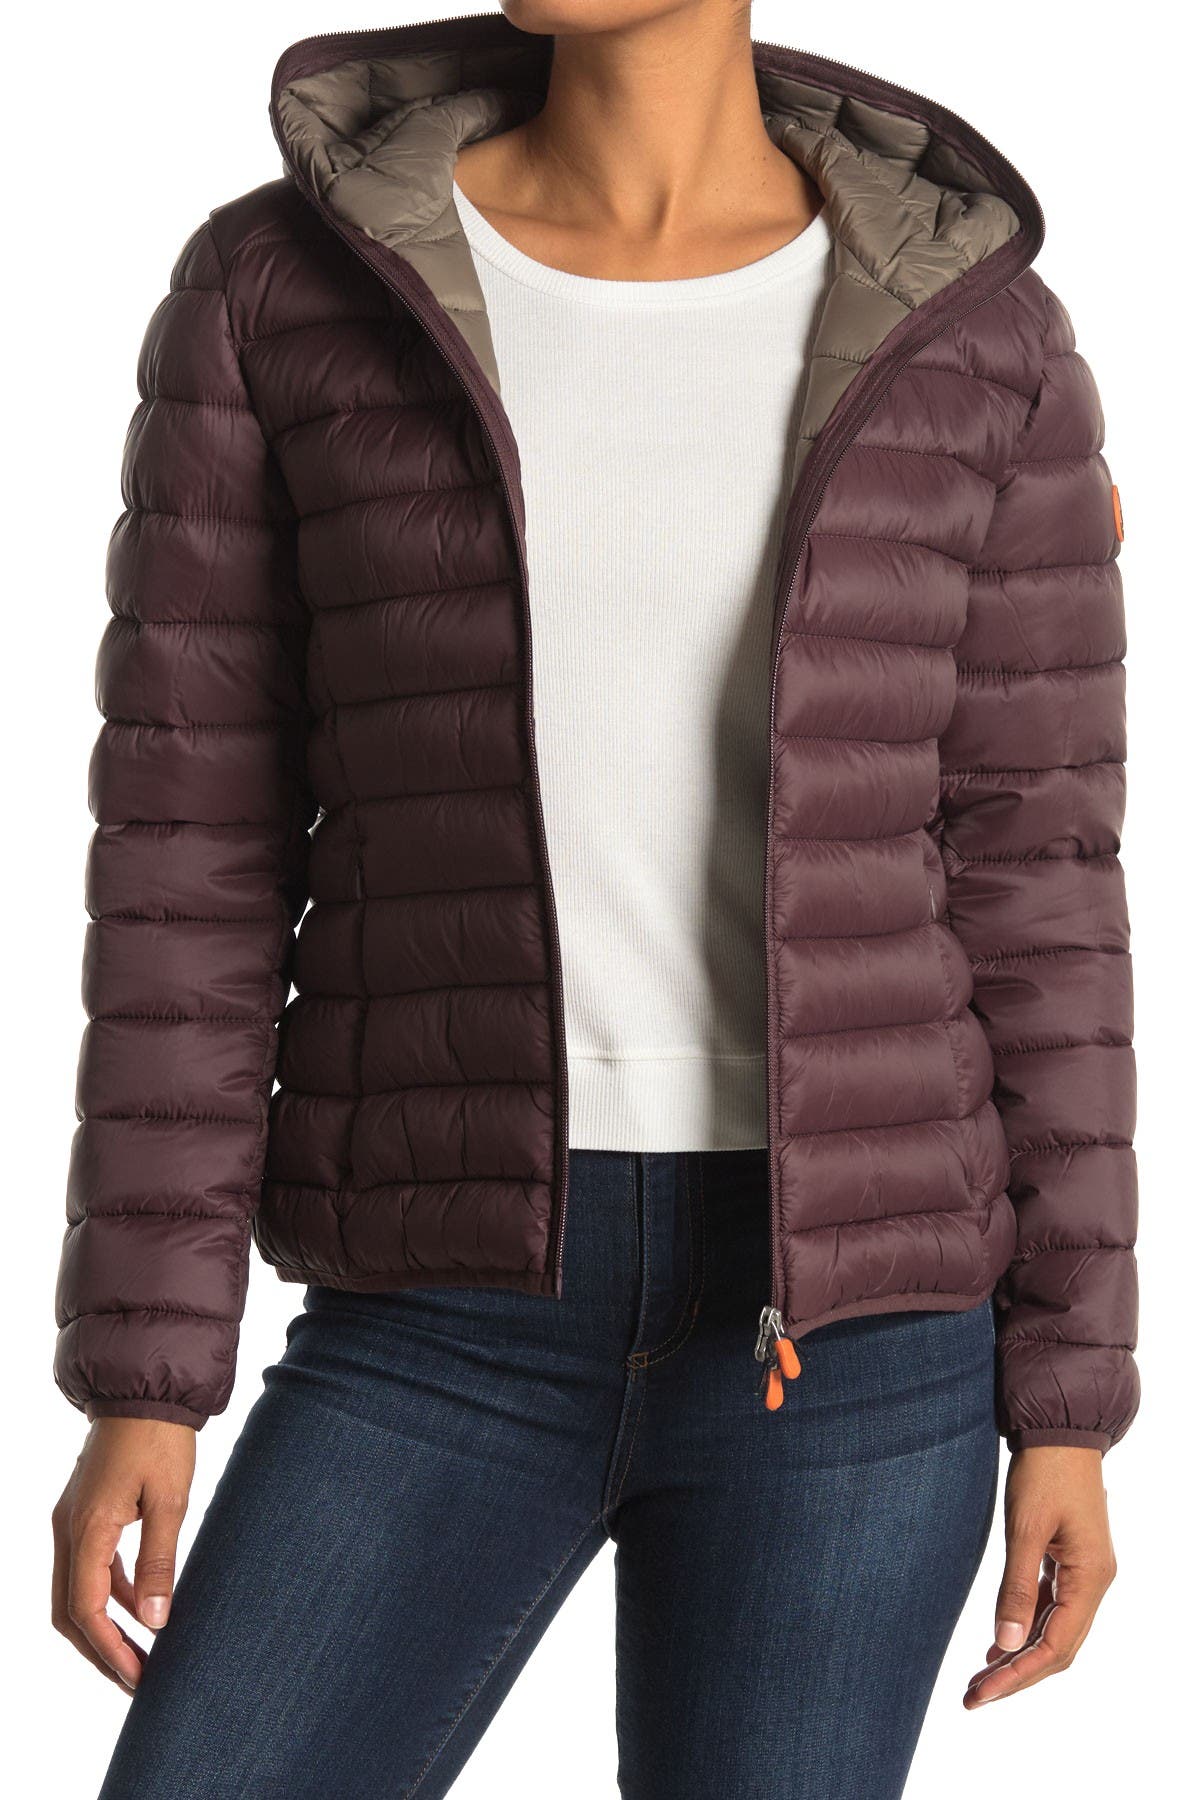 Save The Duck Giga Midweight Jacket Nordstrom Rack